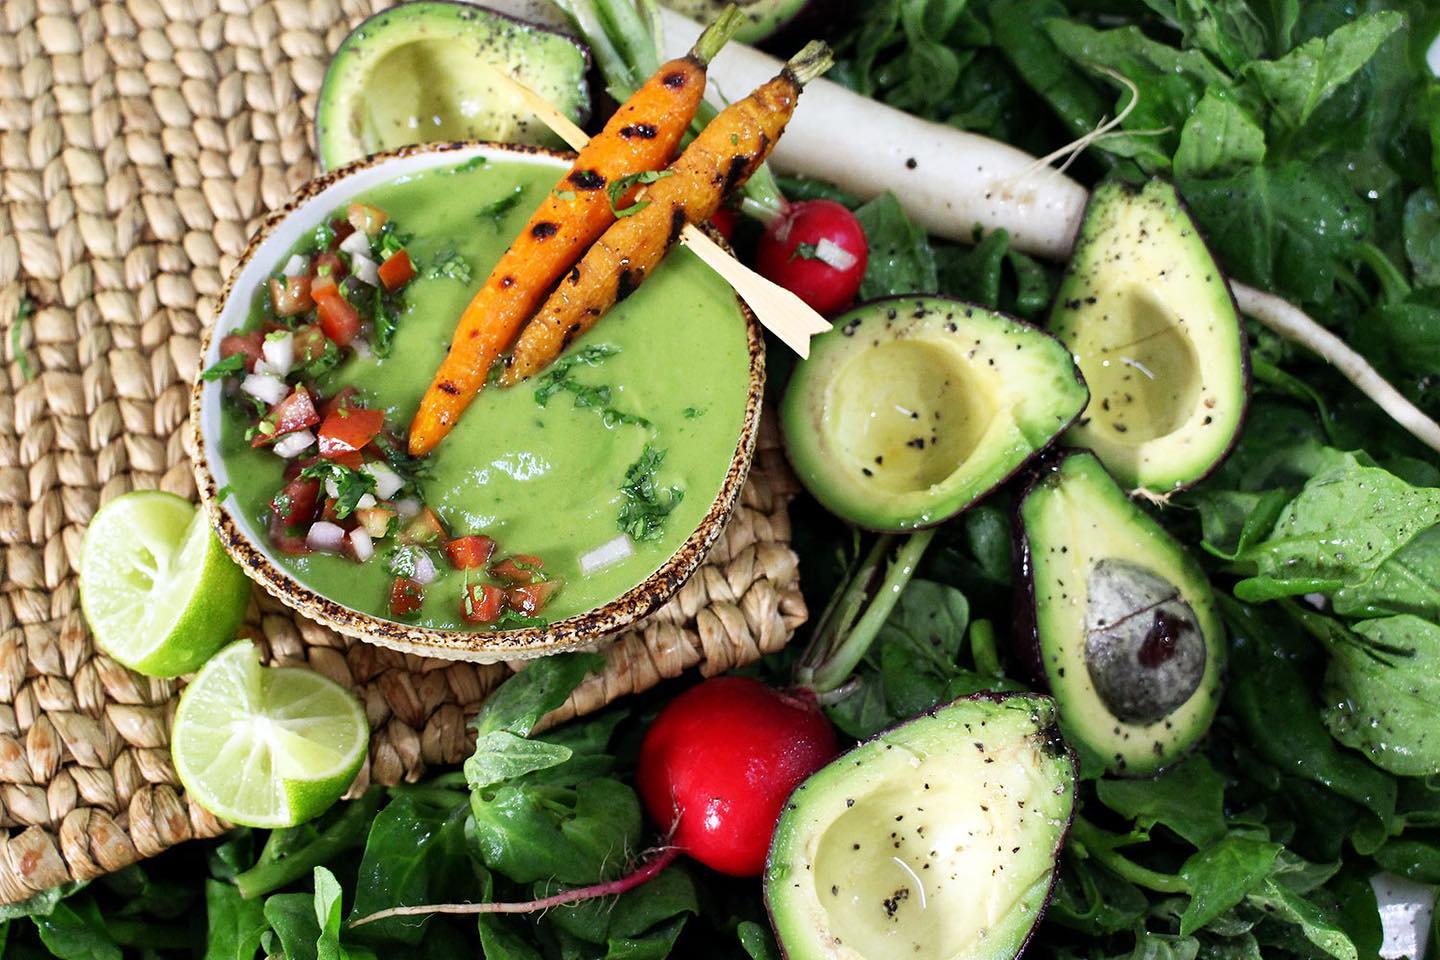 https://www.gibbsfarm.com/farm-tail/recipe-chilled-avocado-soup/ summer time and the living is easy! So is this recipe for chilled no cook avocado soup #avo #avocado #chill #farm #farmtotable #farmfresh #veg #vegetarian #yum